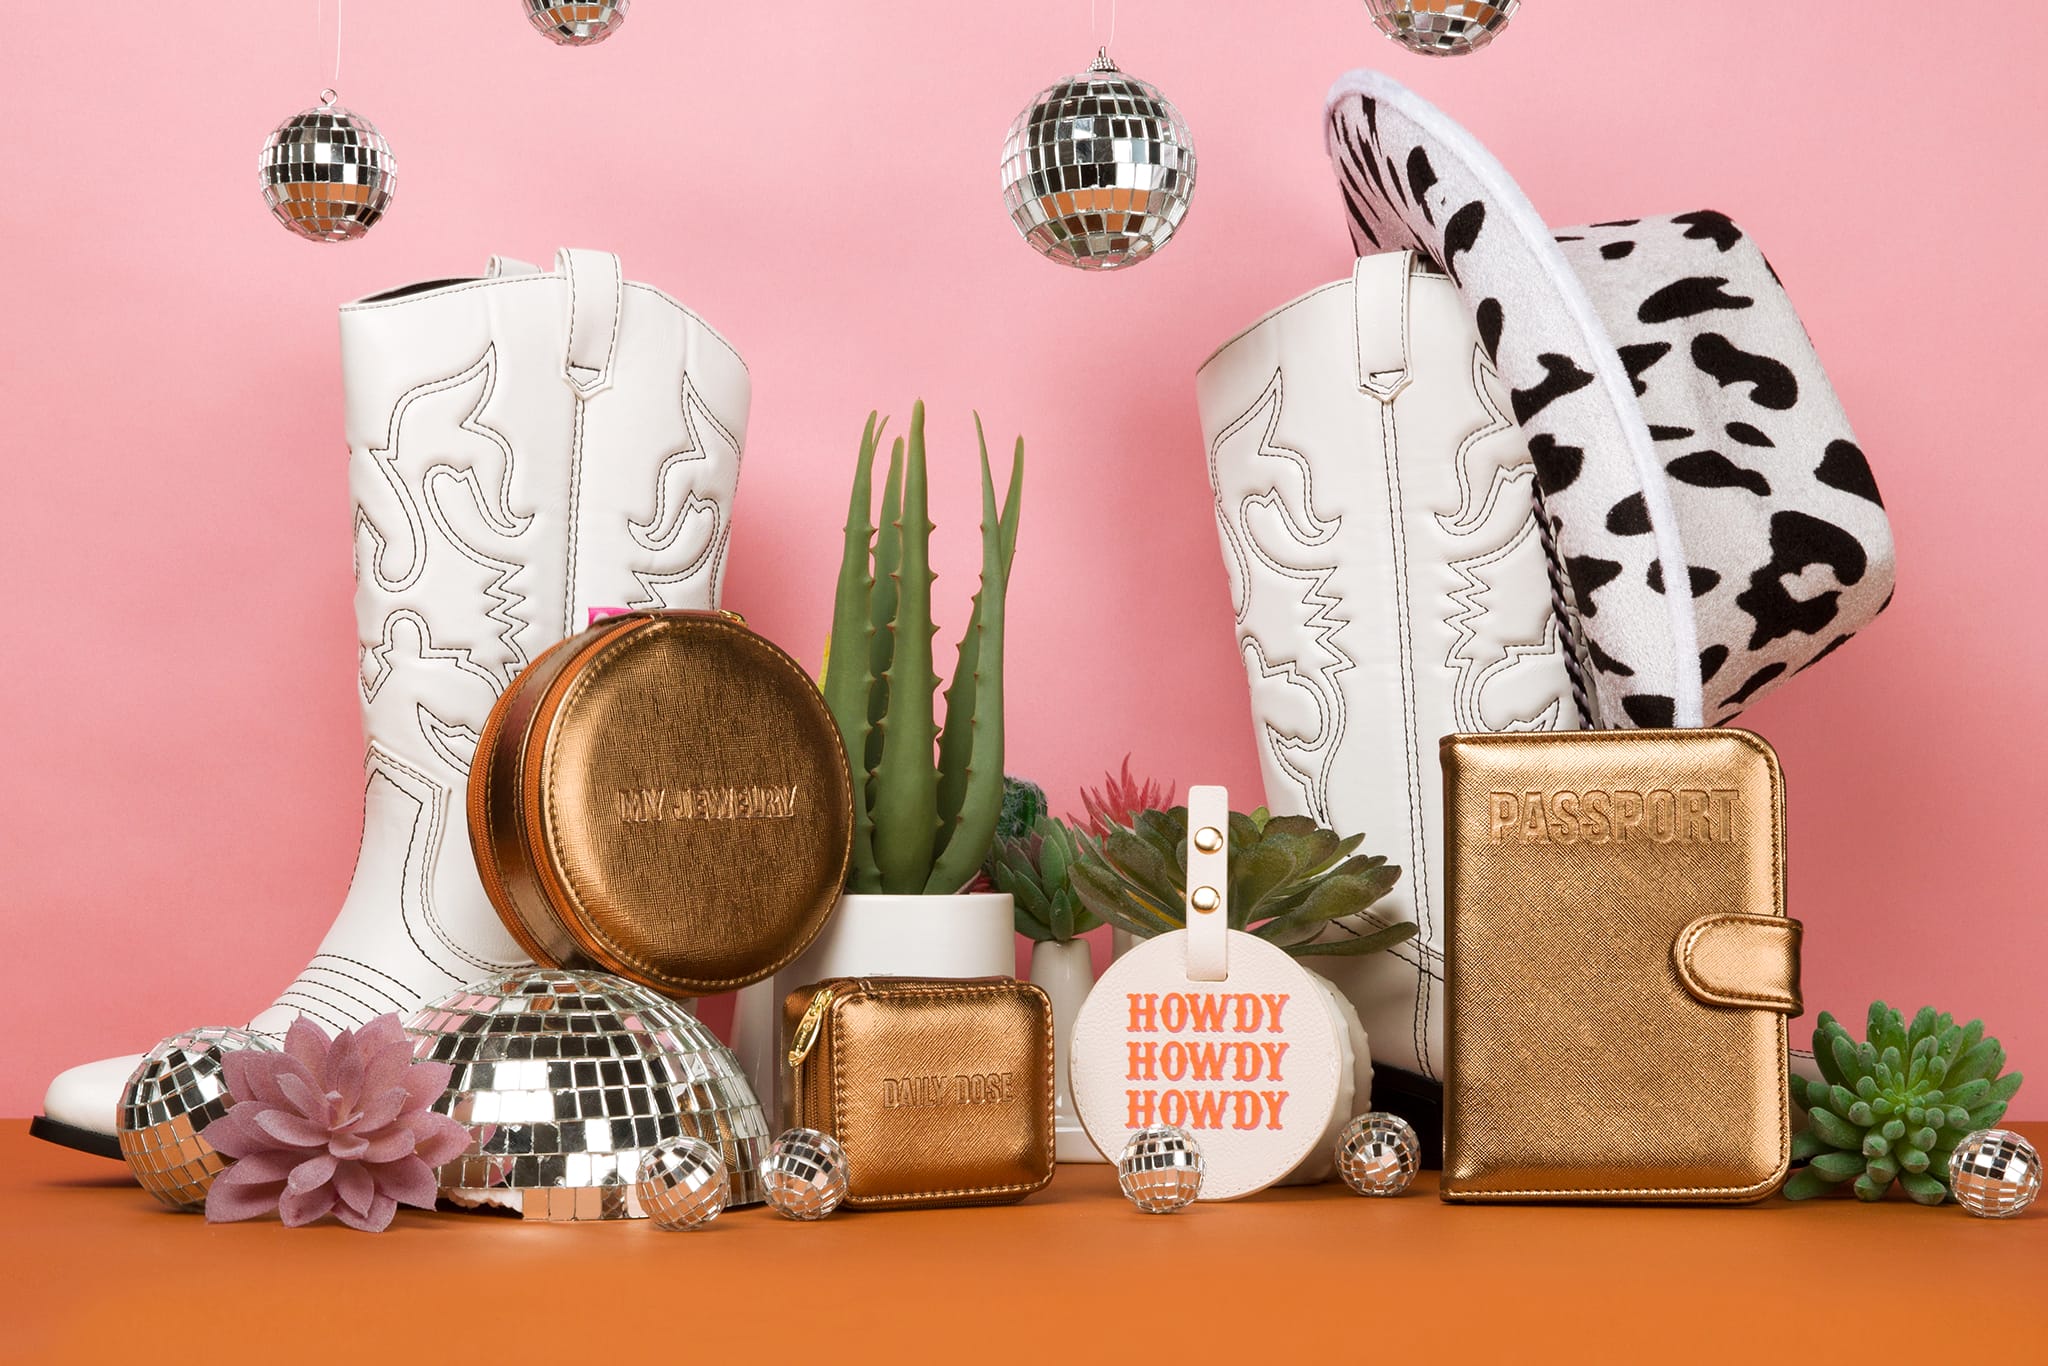 Go West collection accessories are displayed: brown metallic-colored round jewelry case, daily dose rectangle pill case, and passport case, along with "howdy" luggage tag. Accessories are surrounded by cacti, cowboy boots, and disco balls.